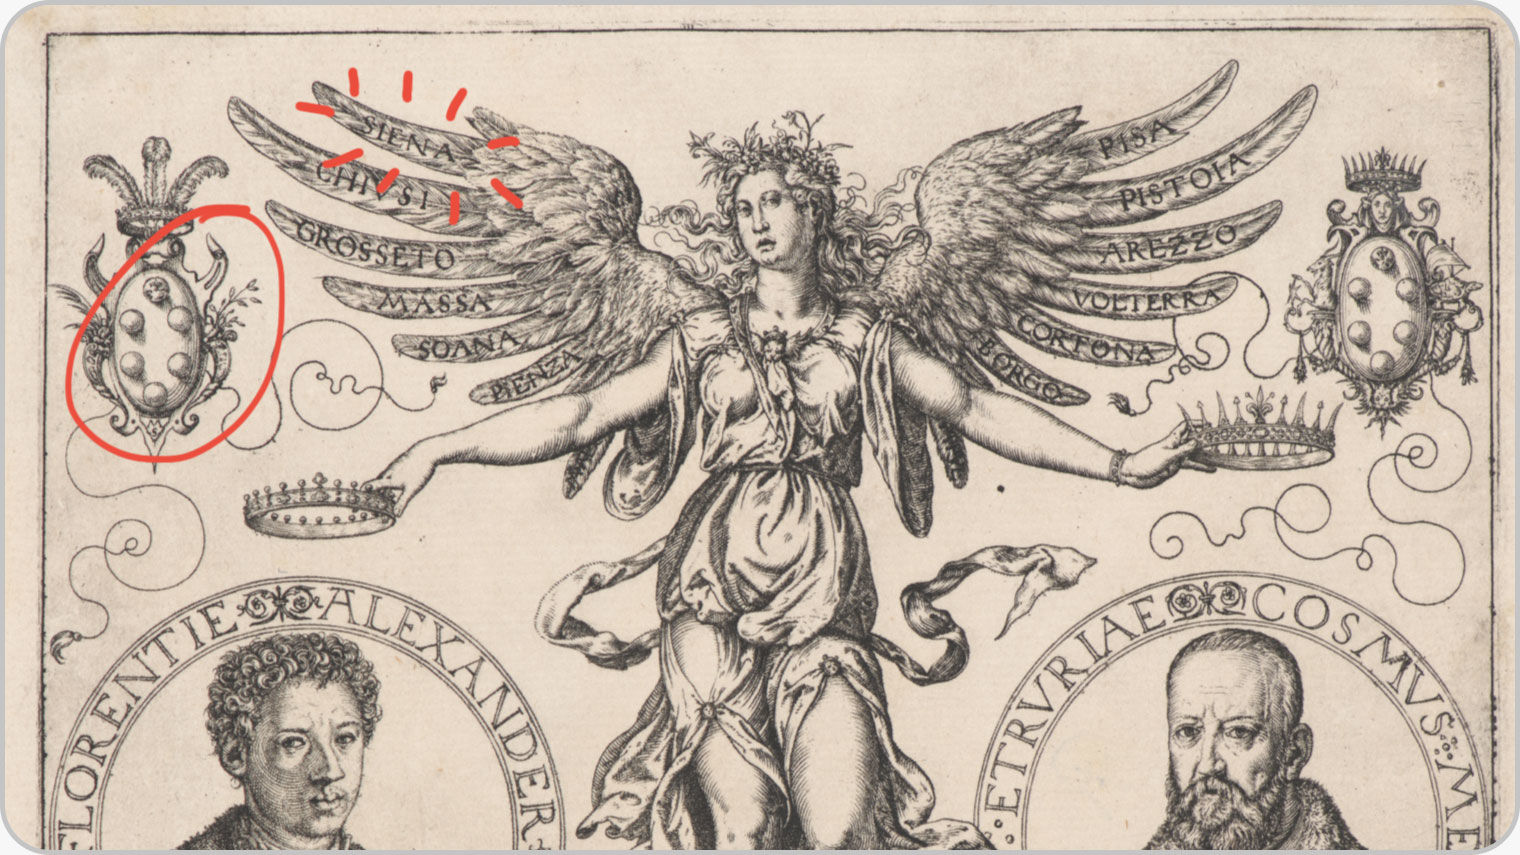 Detail of an engraving; red mark-ups that are not original to the artwork have been added digitally to point out details in the image such as the Medici coat of arms and the city name of Siena written atop one of the feathers of the female figure’s wings